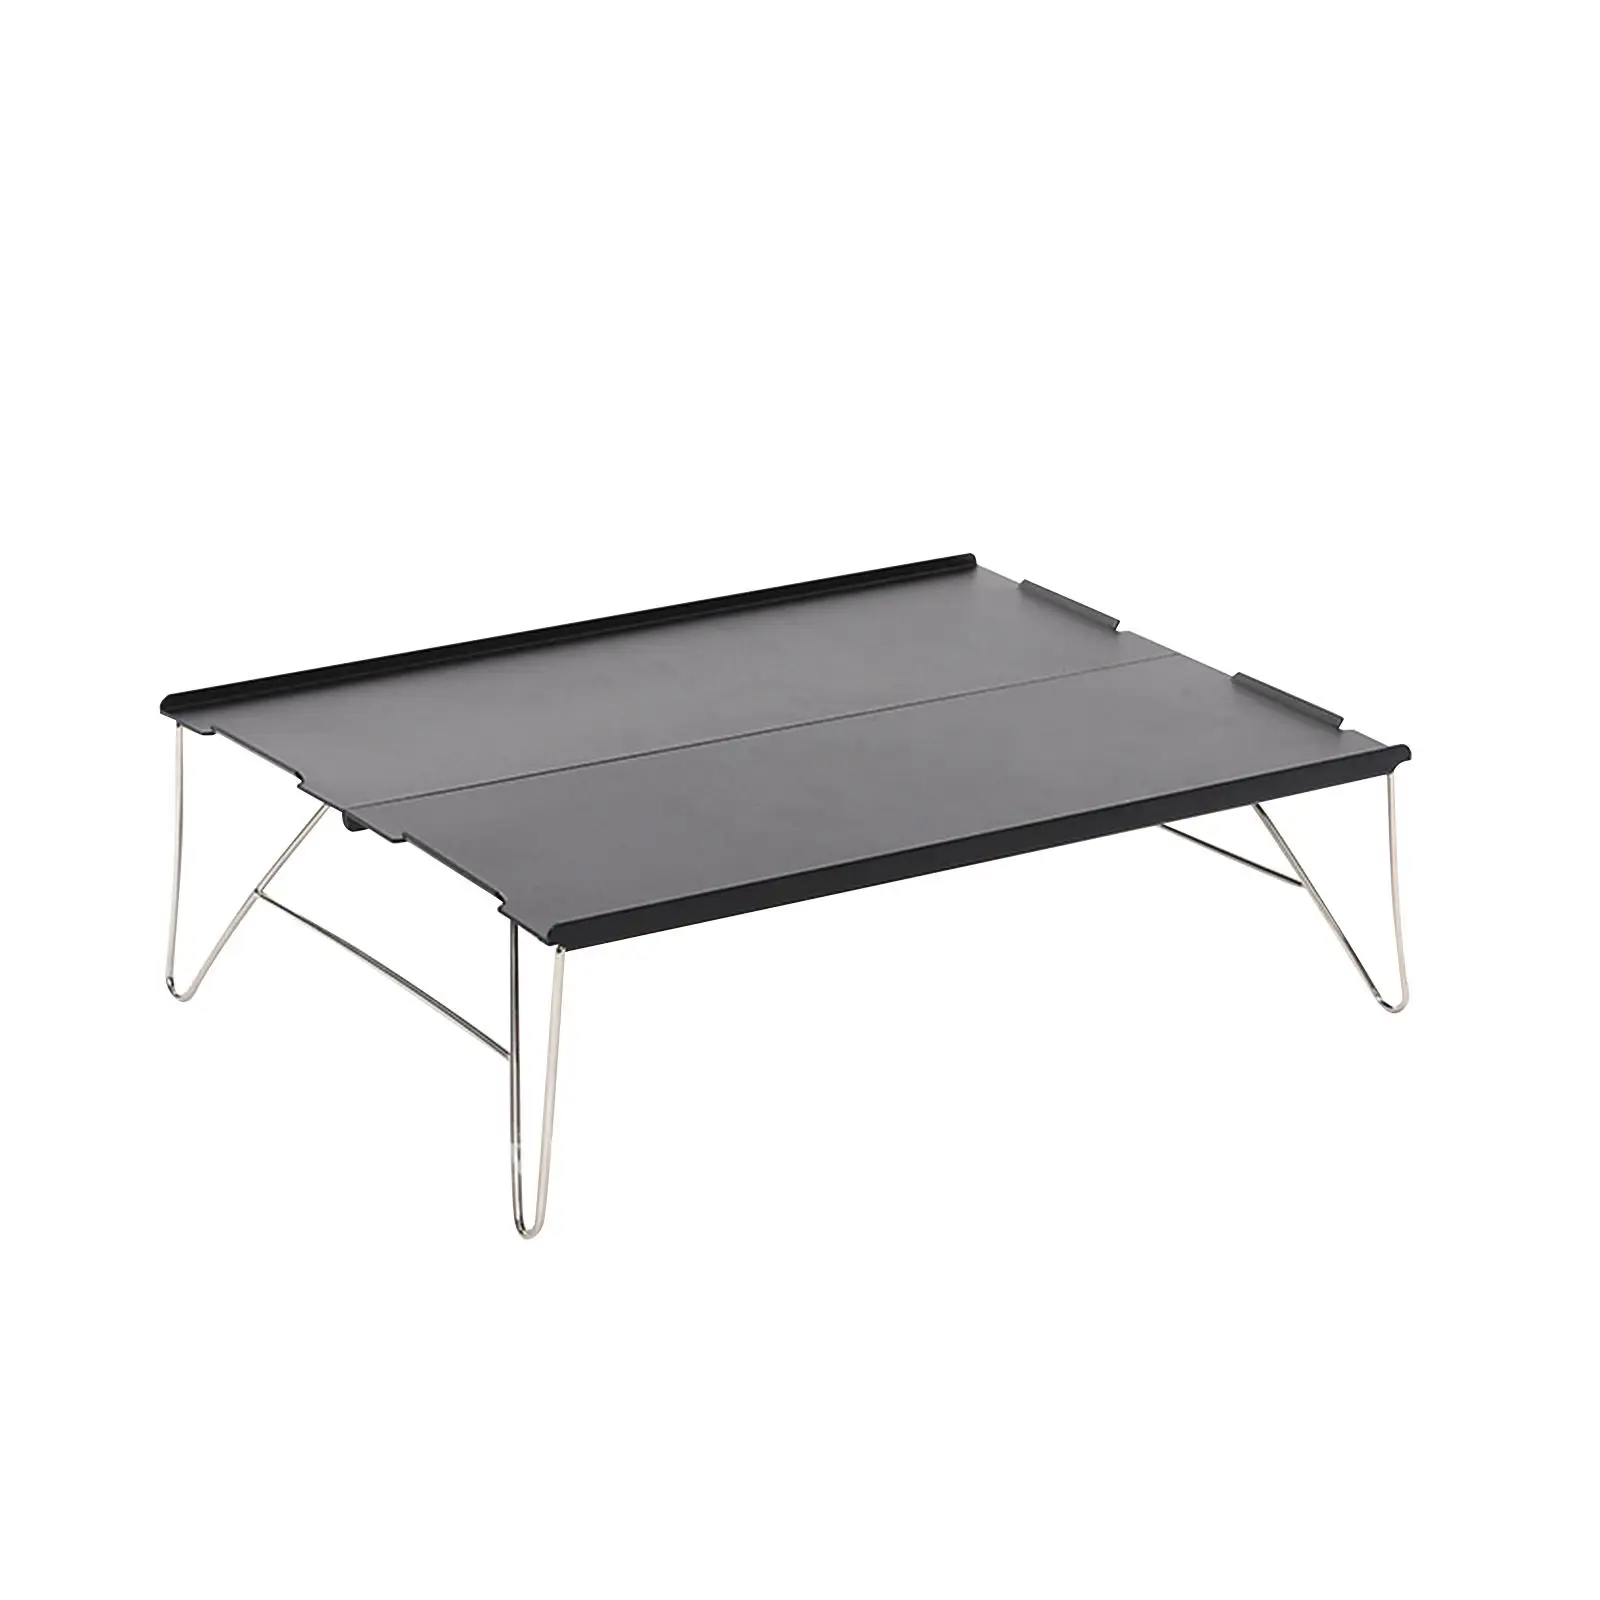 Camp Table Lightweight Floor Desk Aluminum Alloy Multifunctional Square Small for Picnic Travel Garden Small Space Outdoor